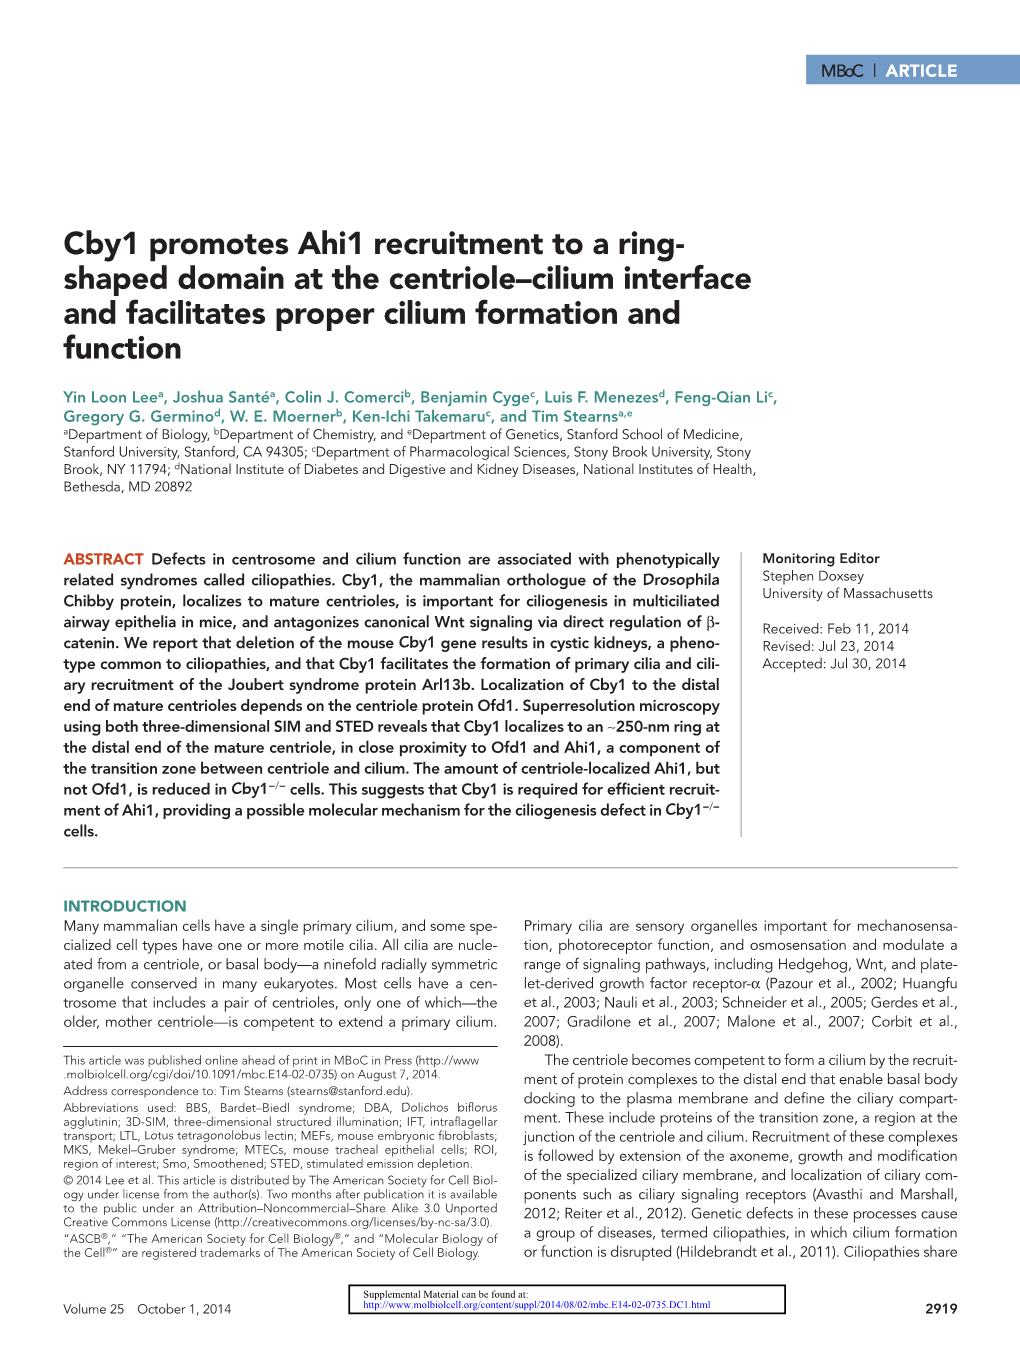 Cby1 Promotes Ahi1 Recruitment to a Ring- Shaped Domain at the Centriole–Cilium Interface and Facilitates Proper Cilium Formation and Function